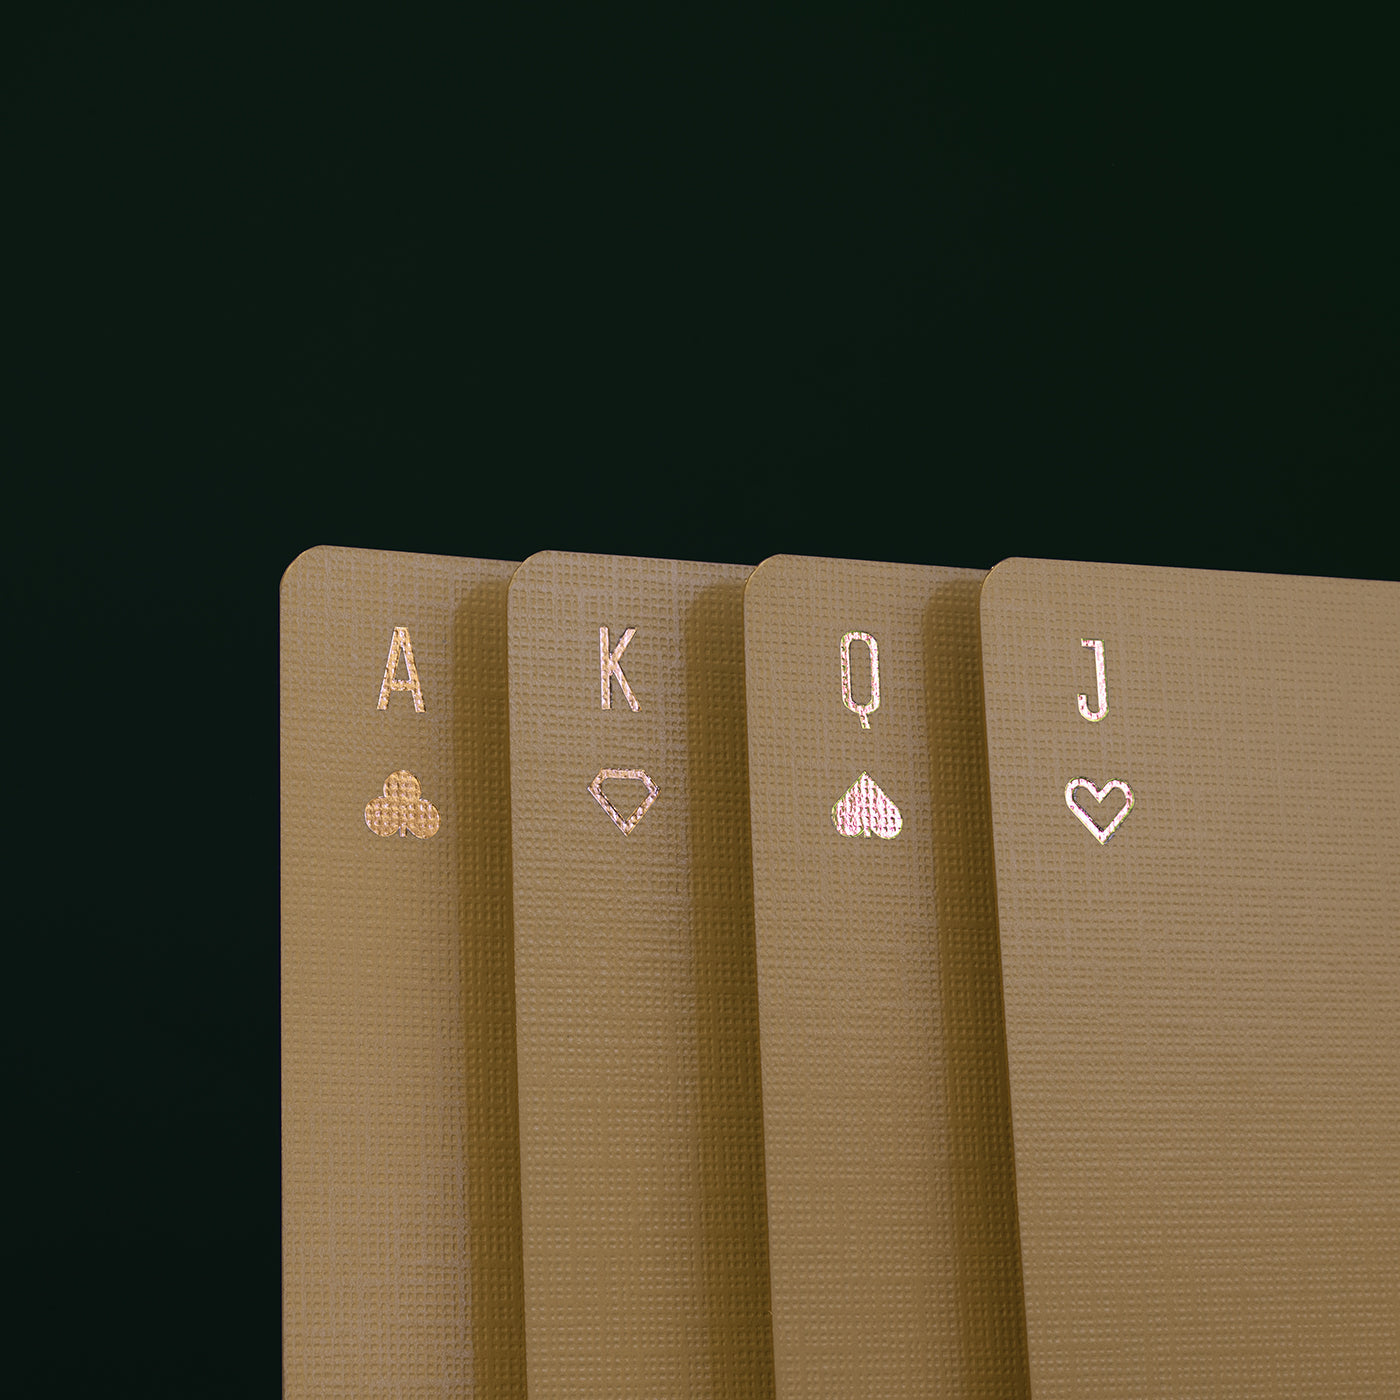 Four playing cards with champagne colored foil